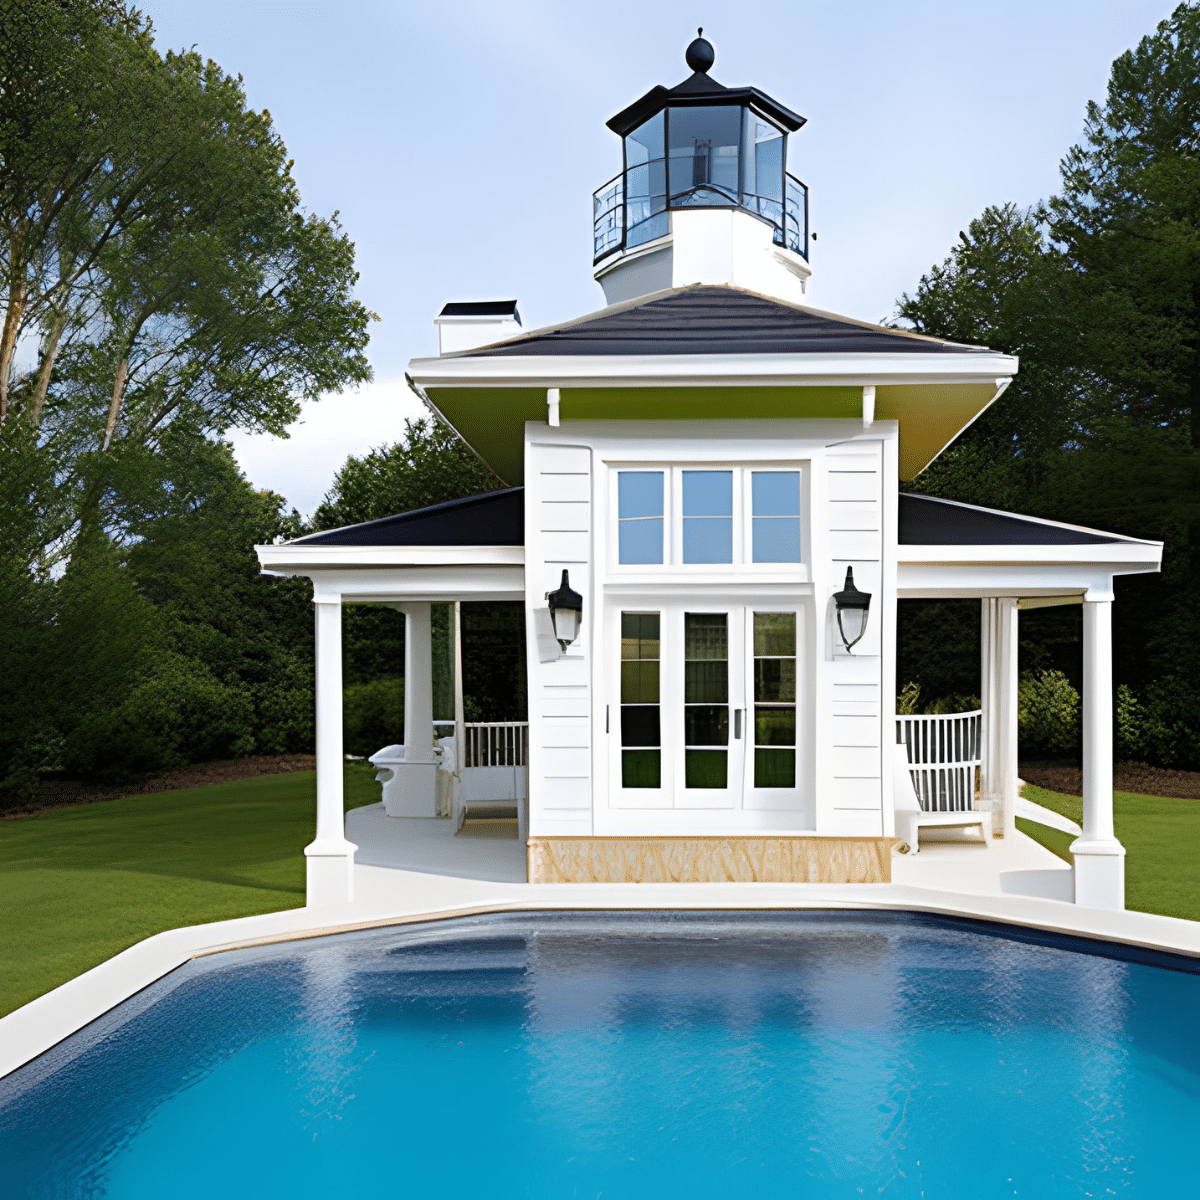 white pool house in the style of a lighthouse tower